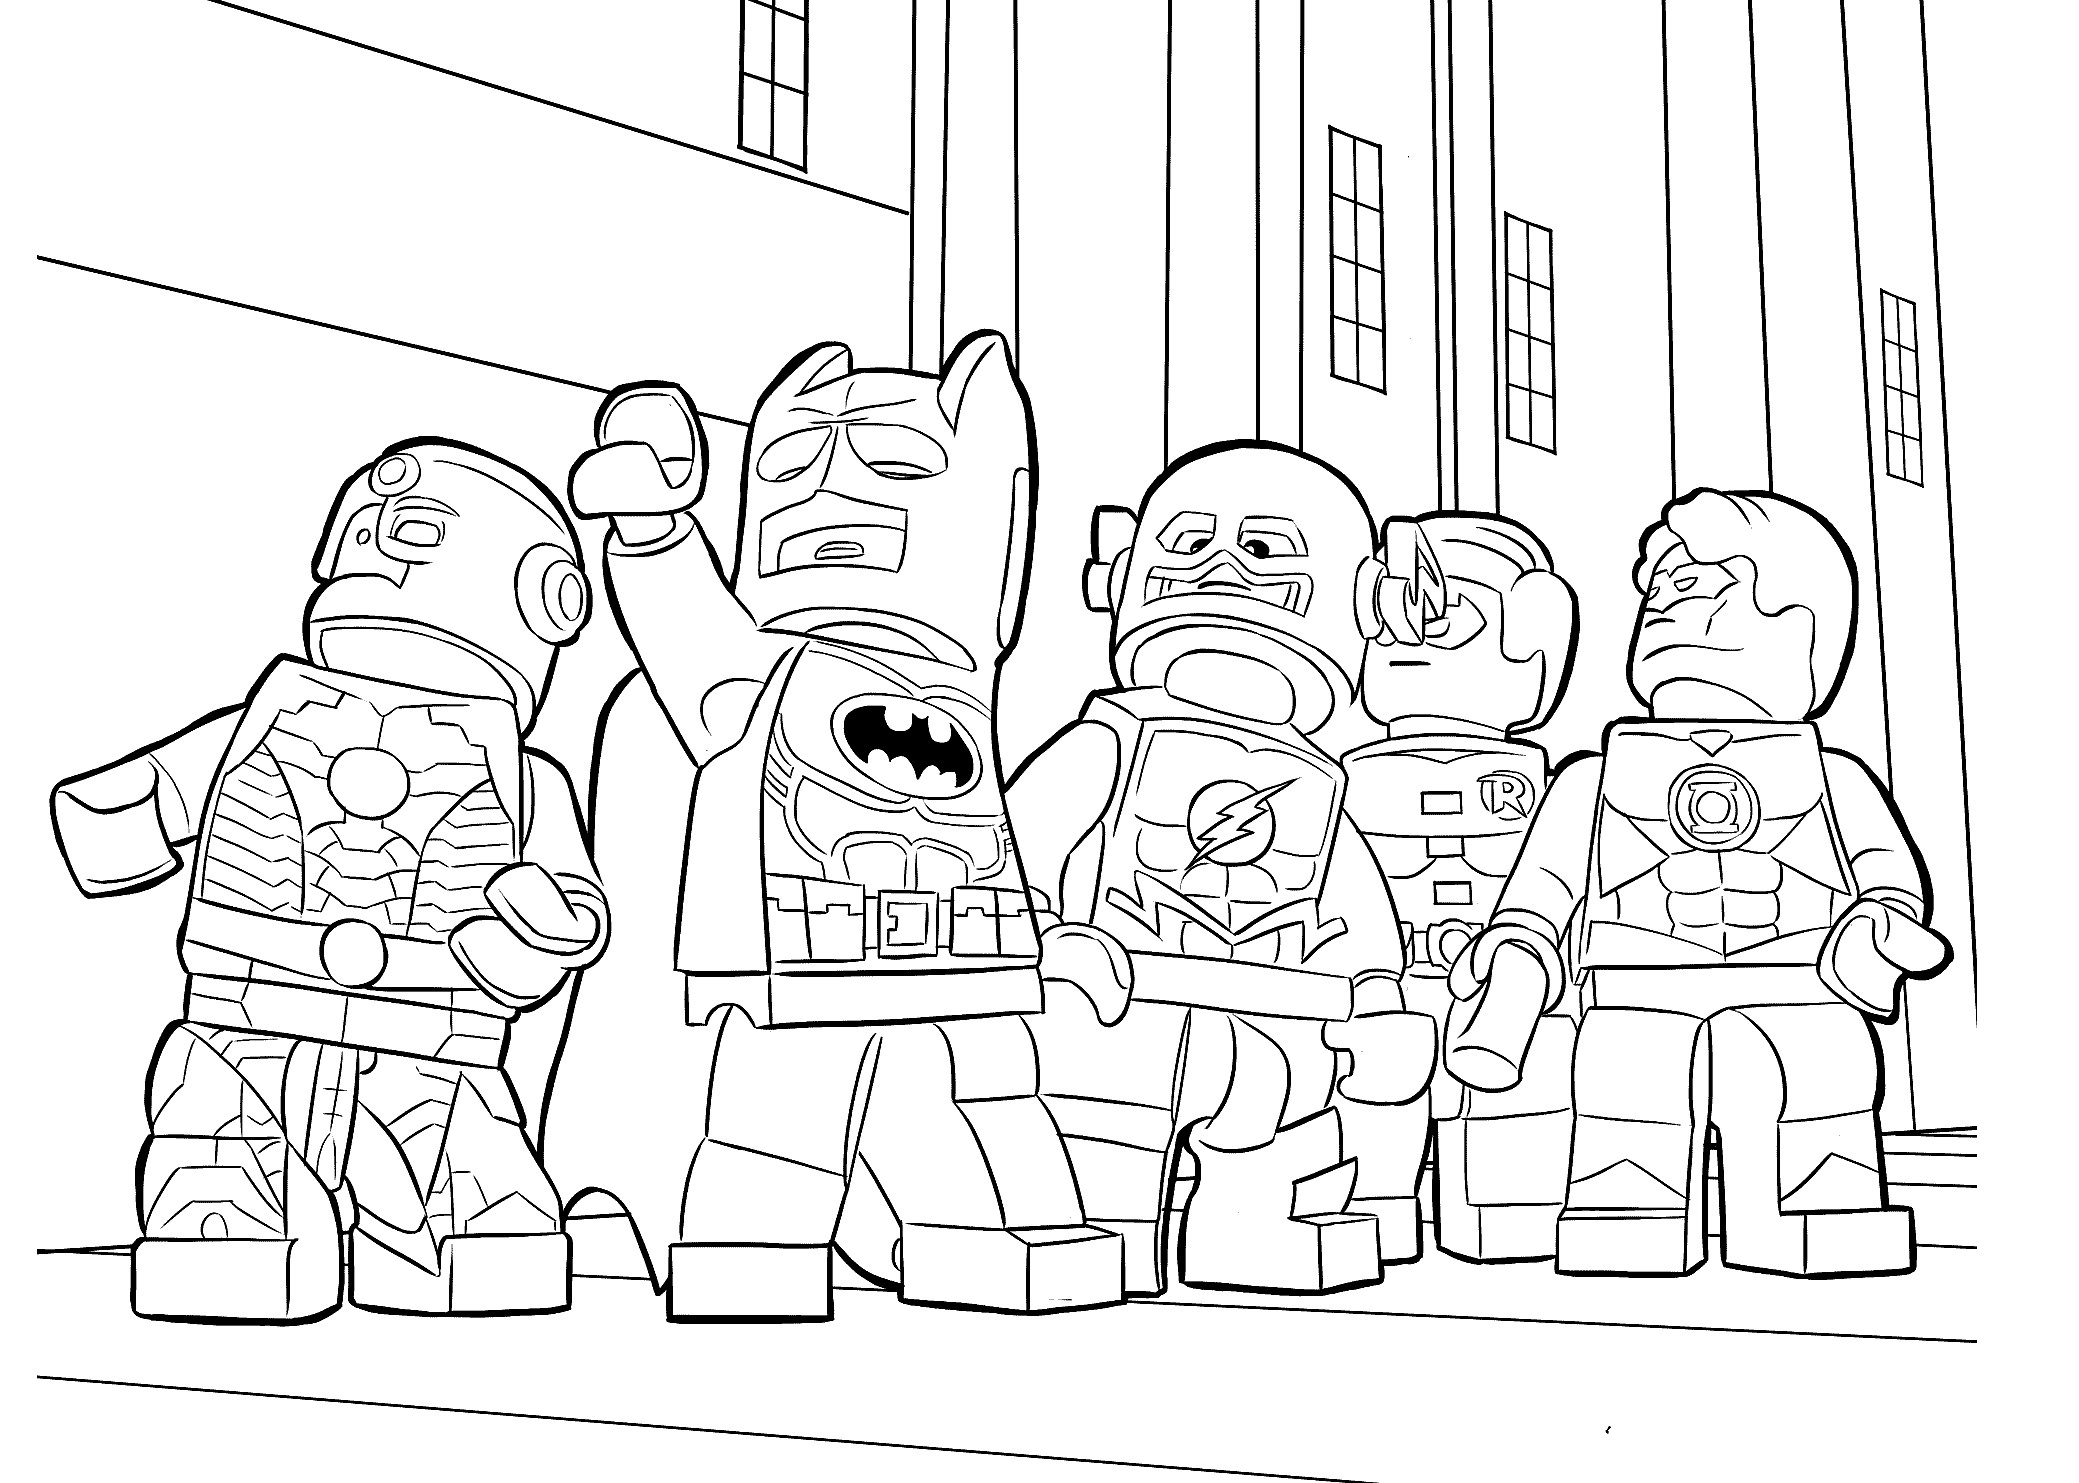 Free Coloring Printable Sheets For Boys
 Lego heroes coloring page for boys printable free Lego